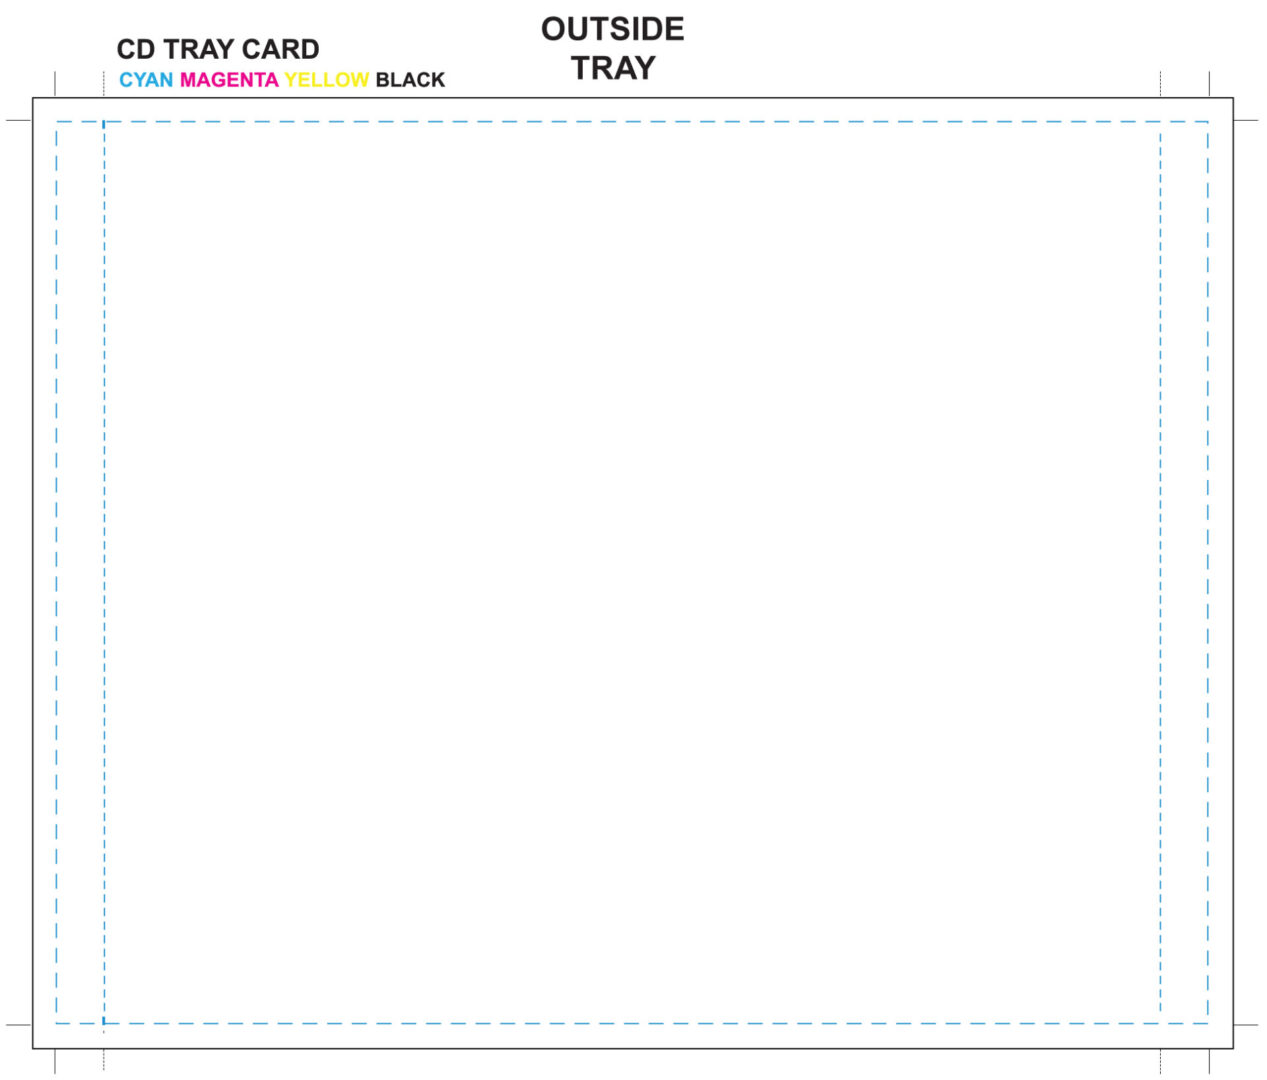 CD Video TEMPLATE_Tray card